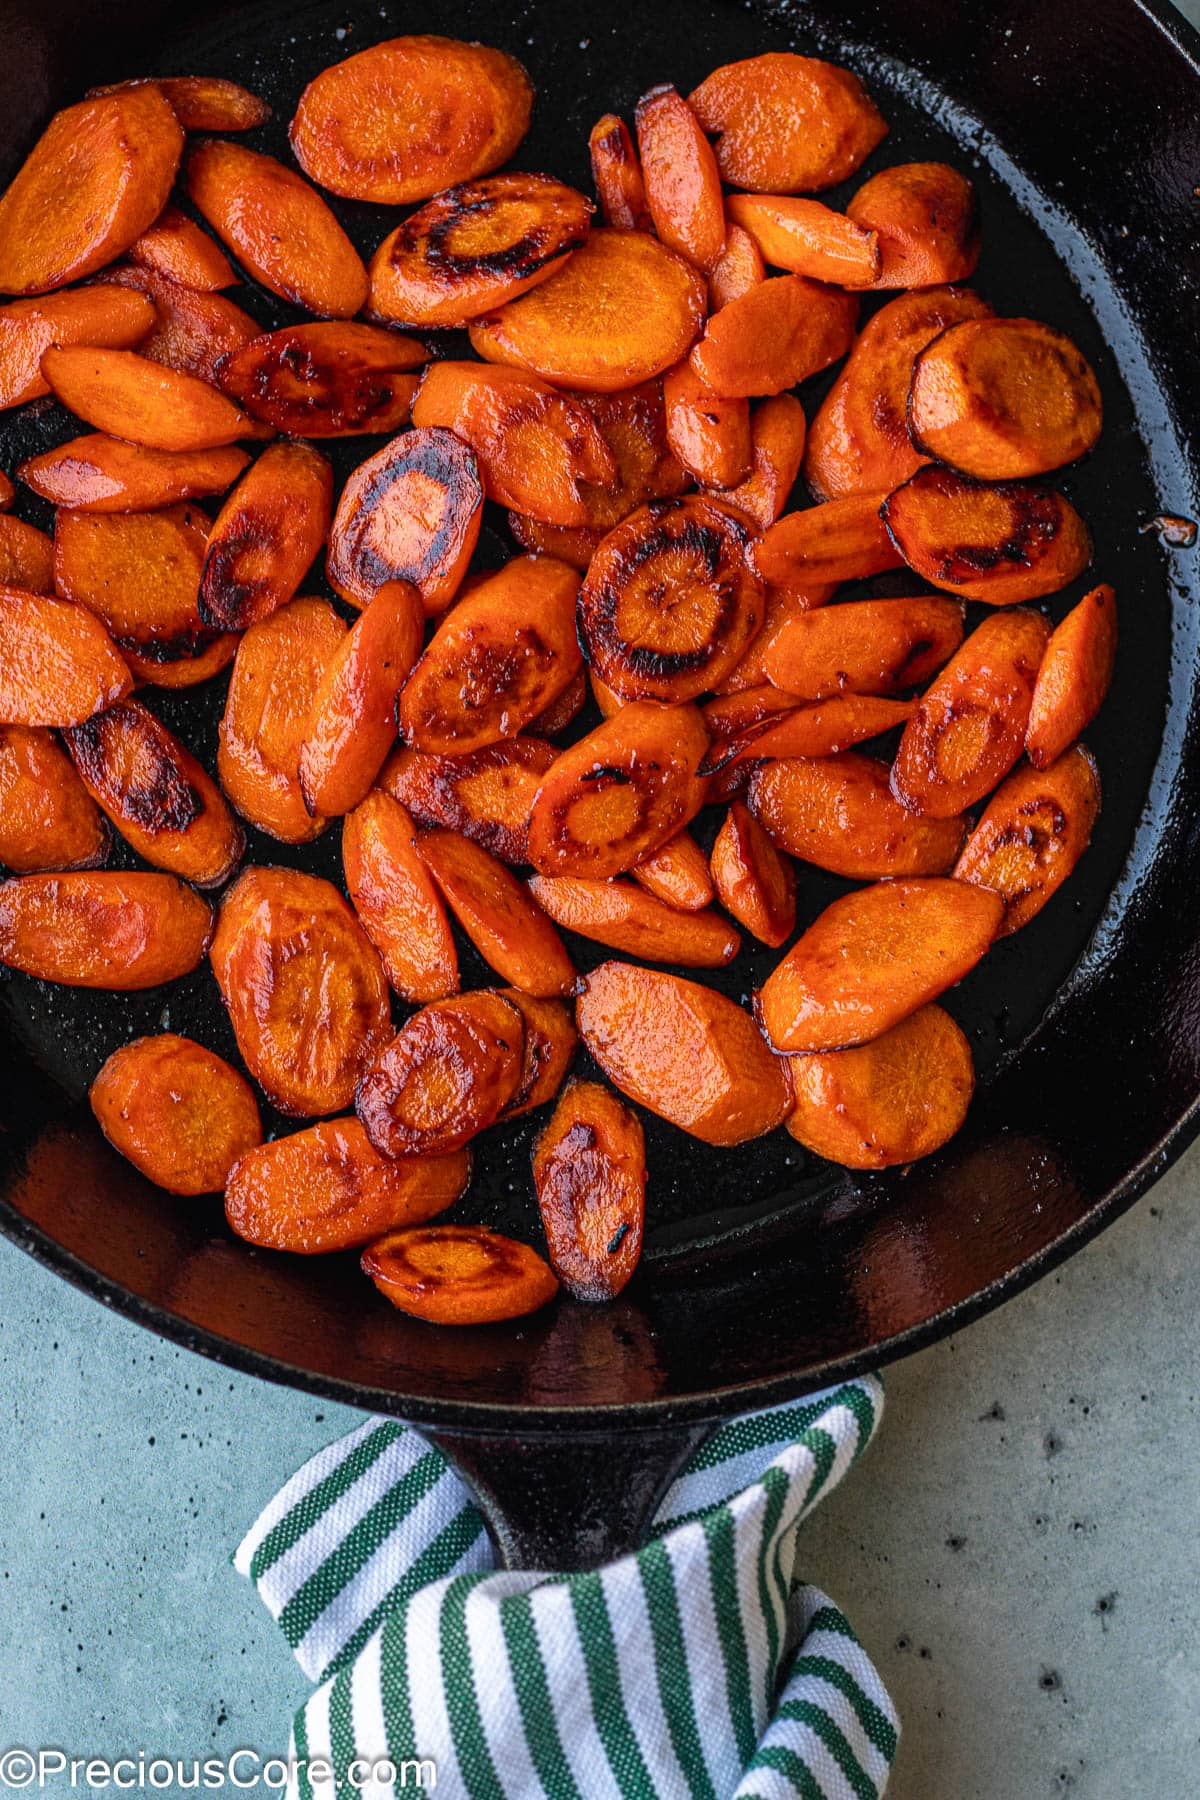 Cooked Fried Carrots in a Skillet.